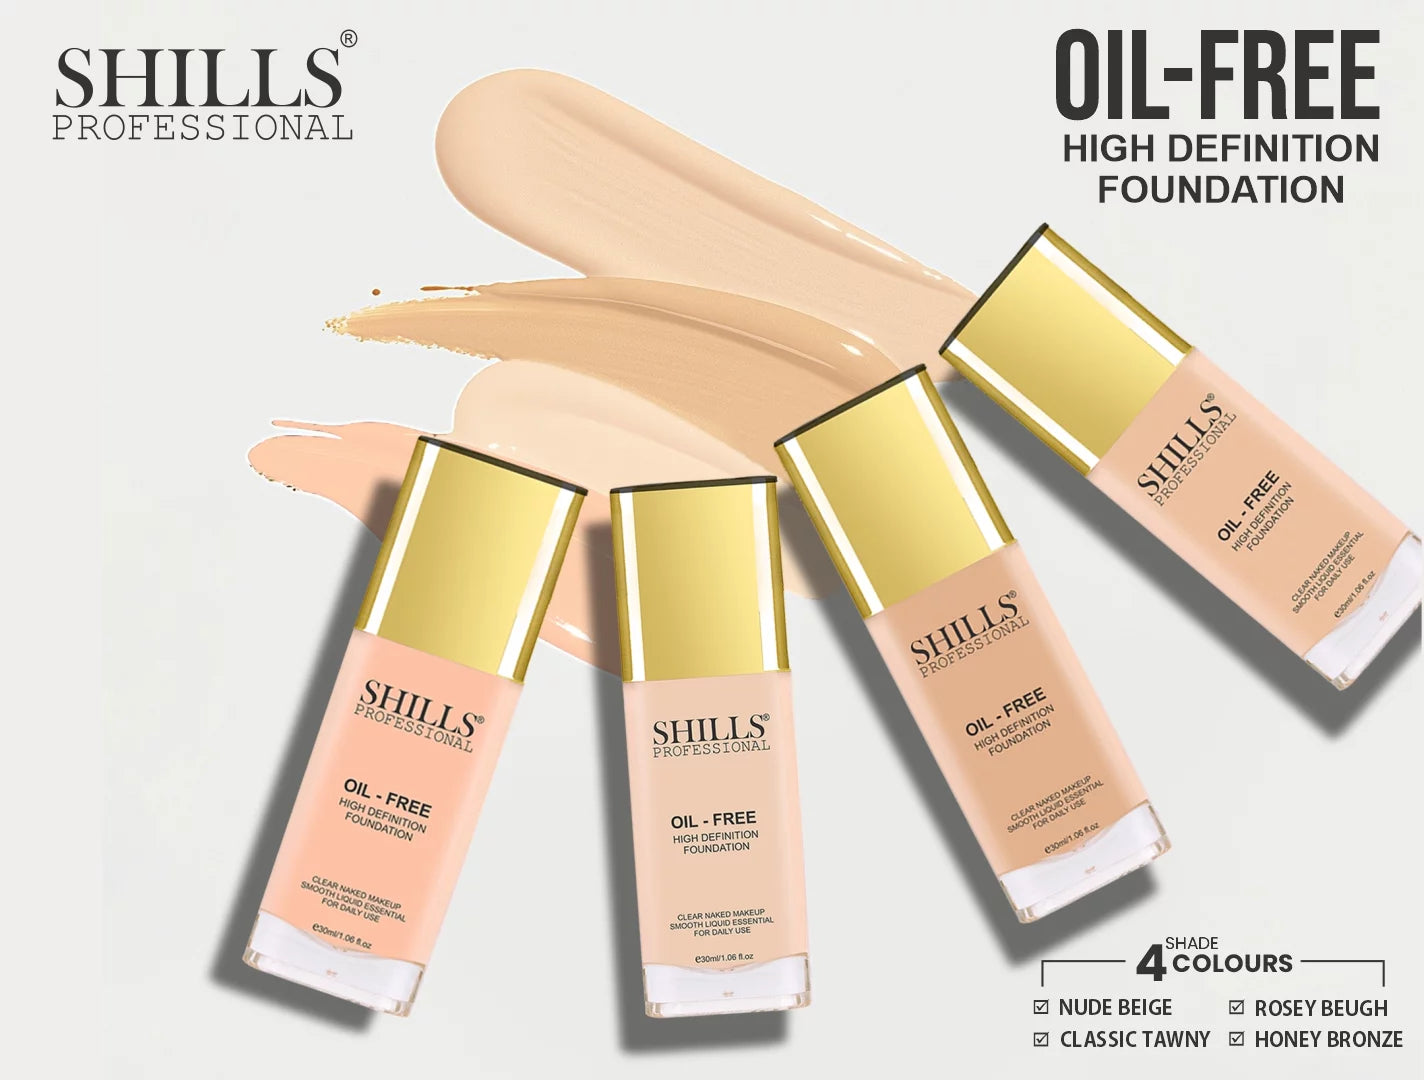 Shills Professional Oil-Free High Definition Foundation